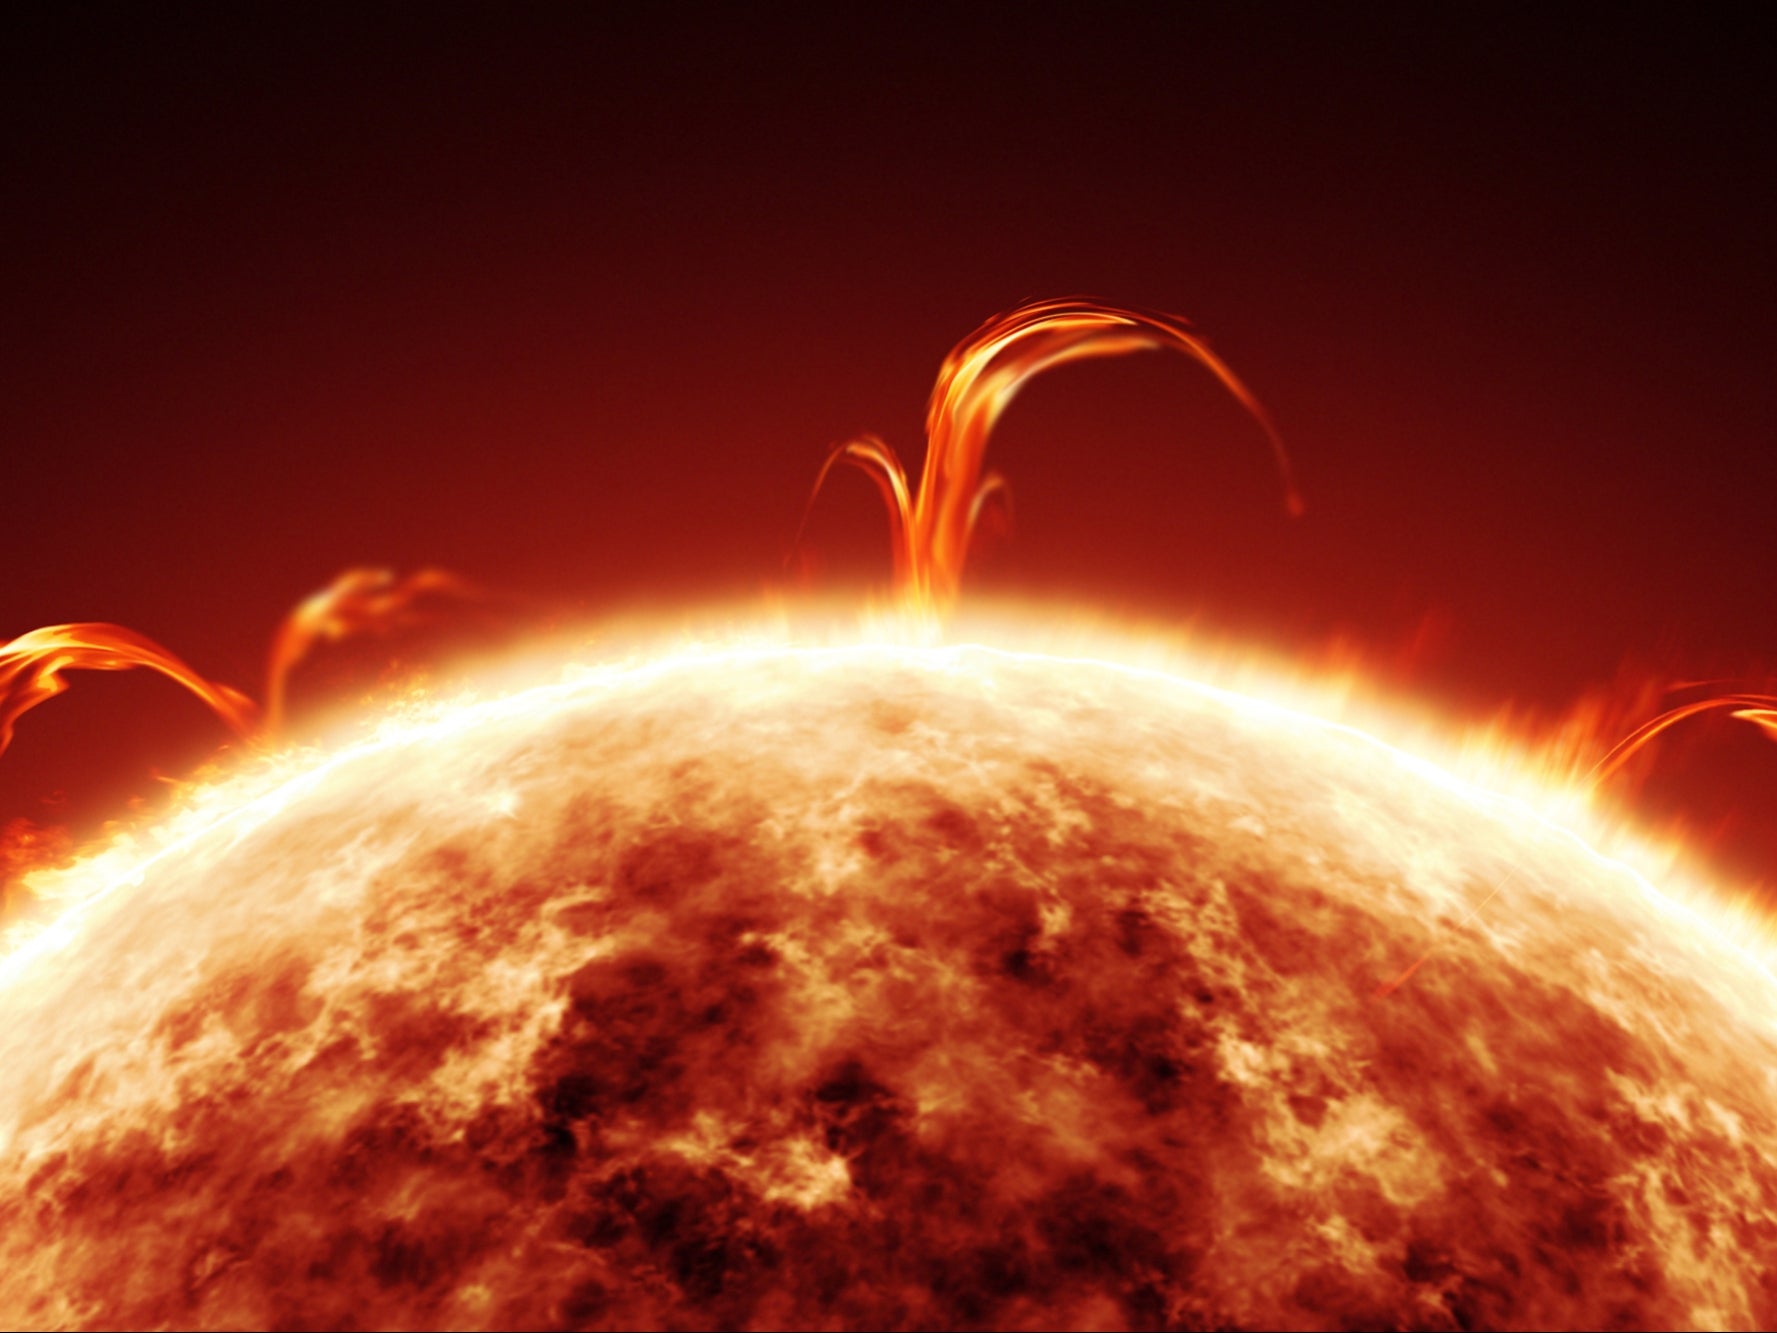 Are We Safe? A Second Giant Hole Appears on the Sun’s Surface